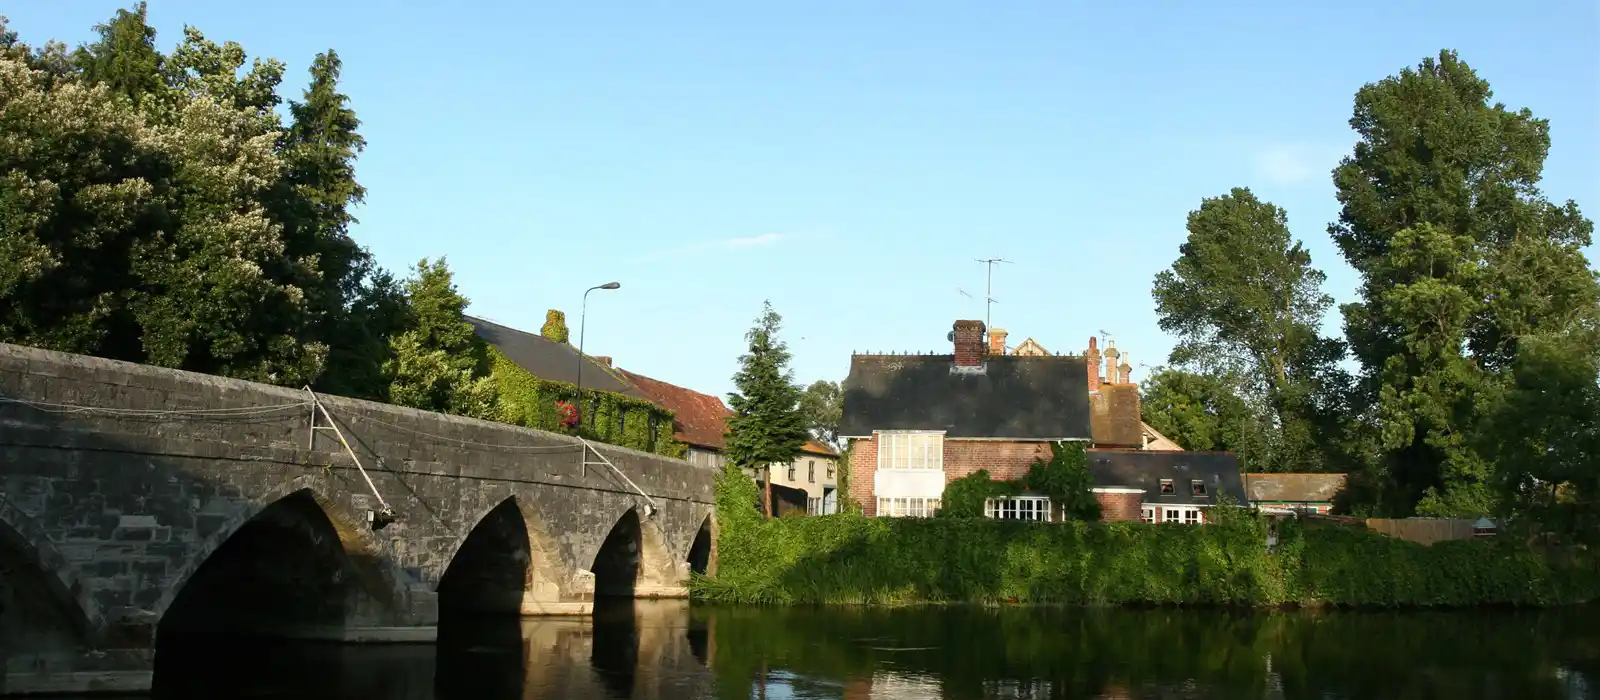 Fordingbridge in the New Forest